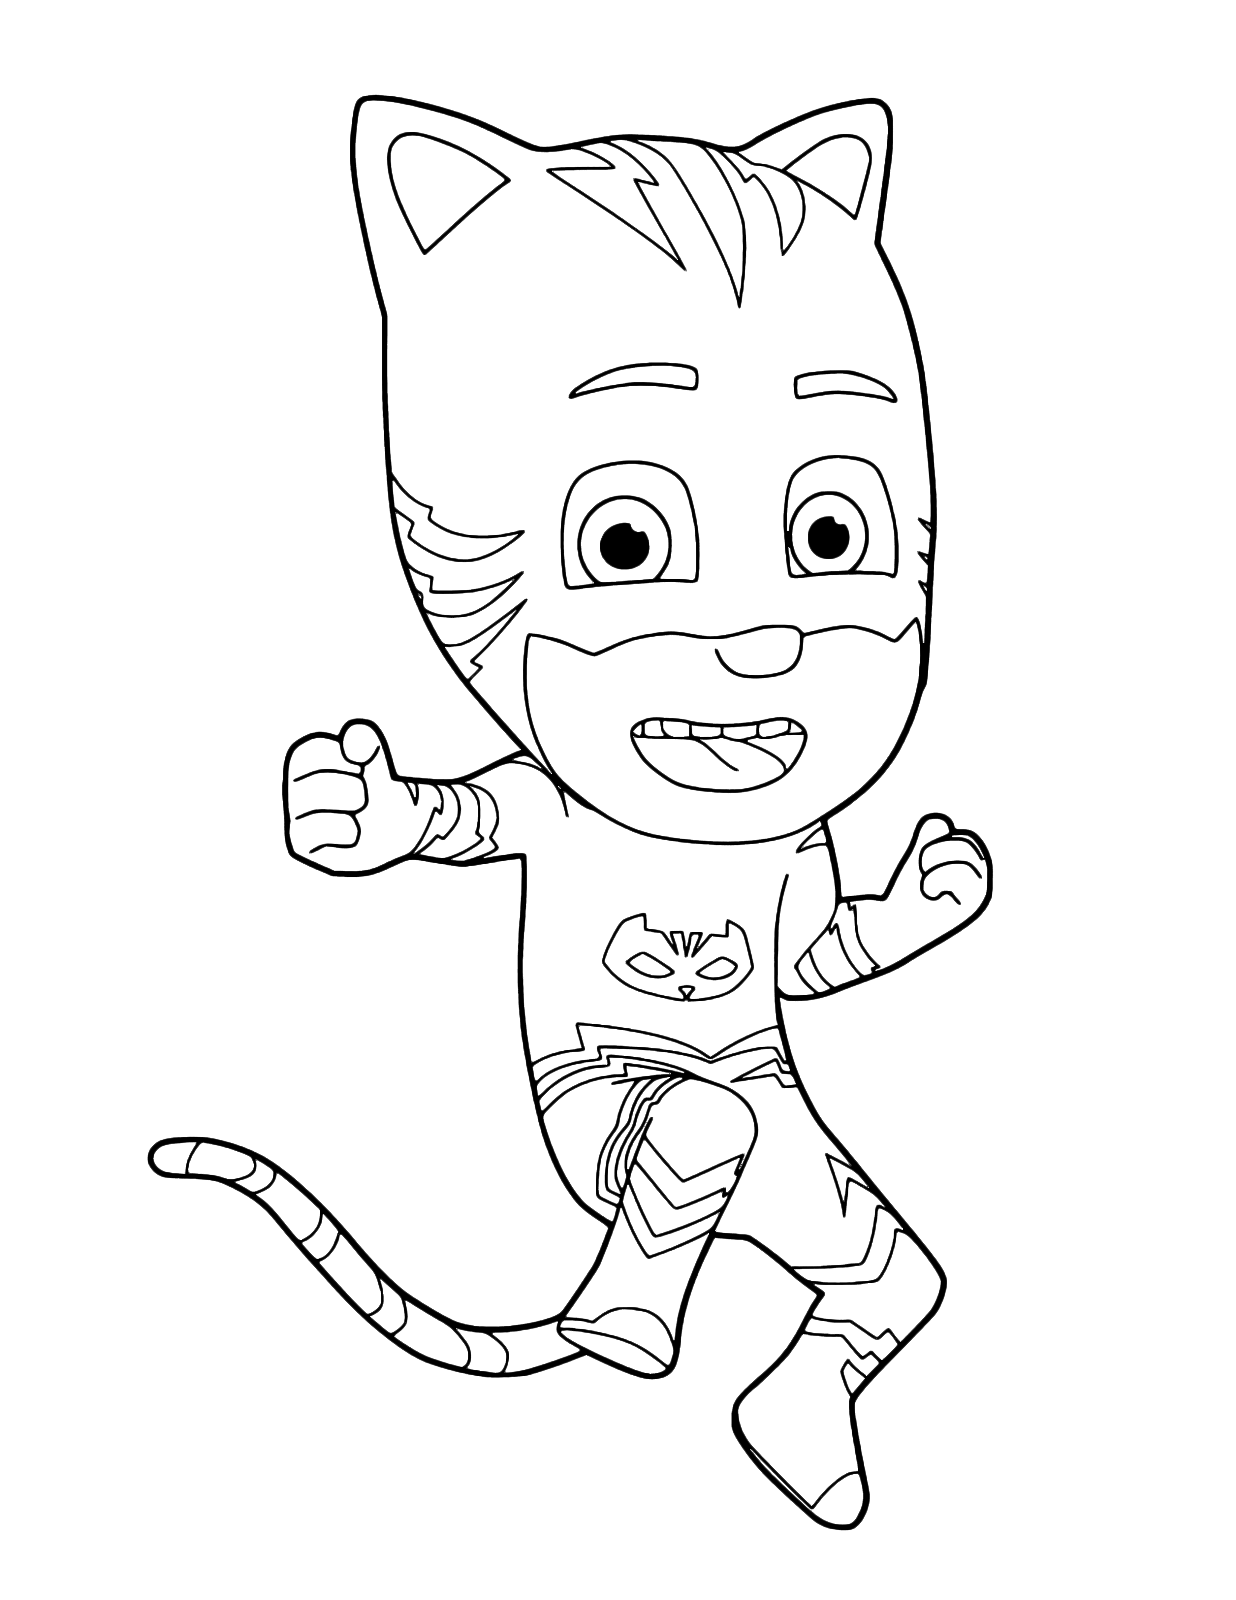 PJ Masks - Catboy ready for action